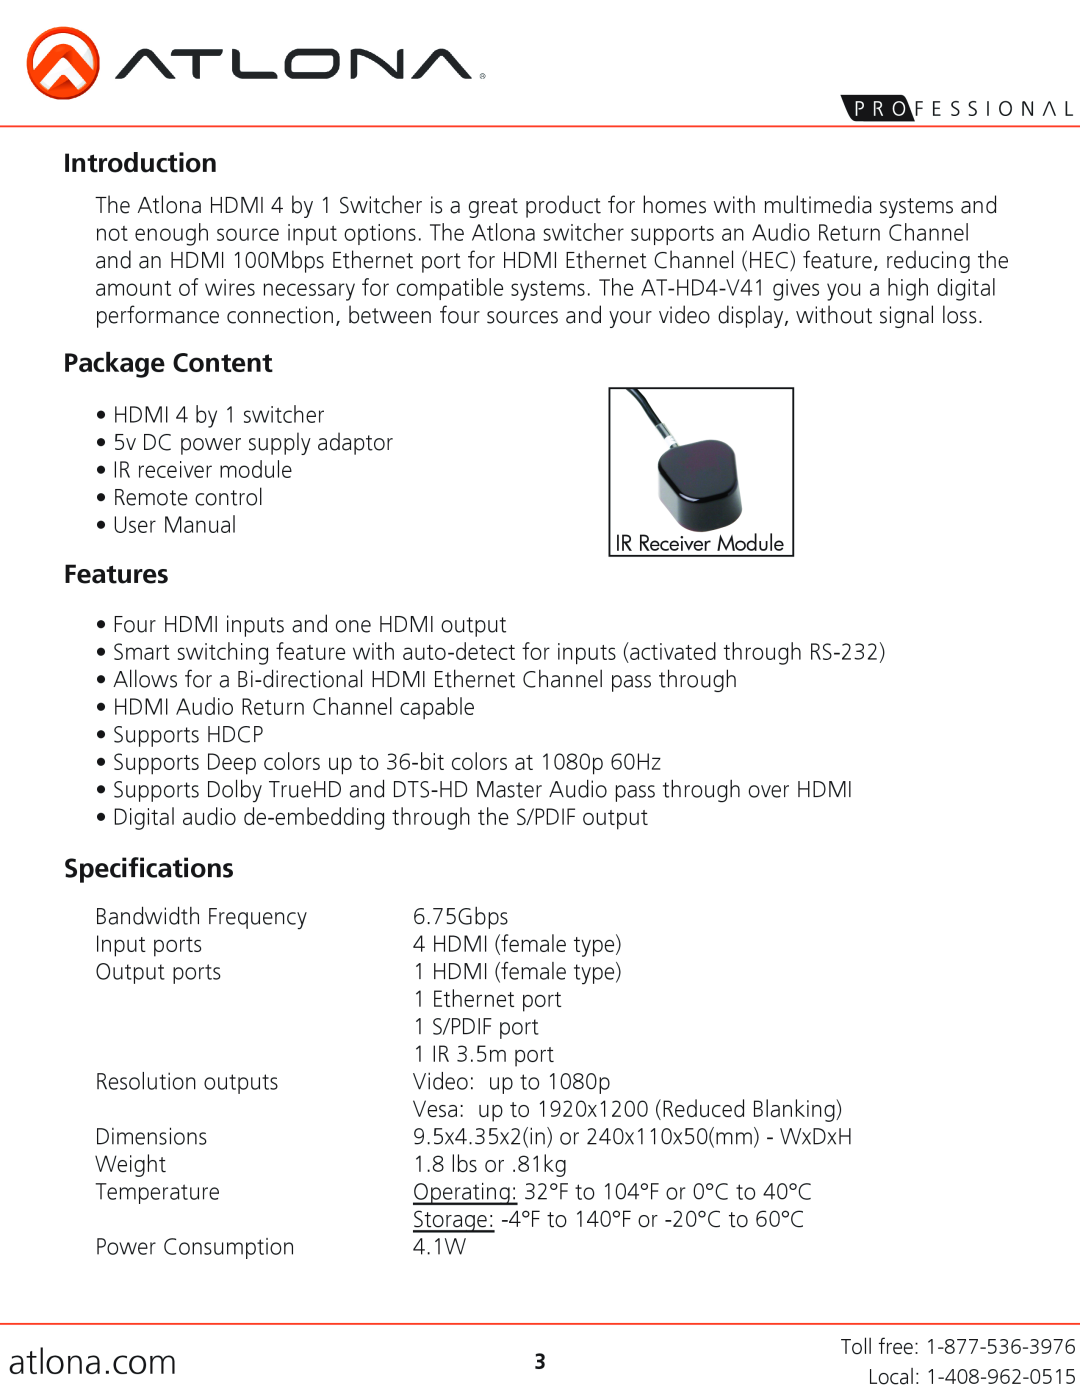 Atlona AT-HD4-V41 user manual Introduction, Package Content, Features, Specifications, atlona.com 